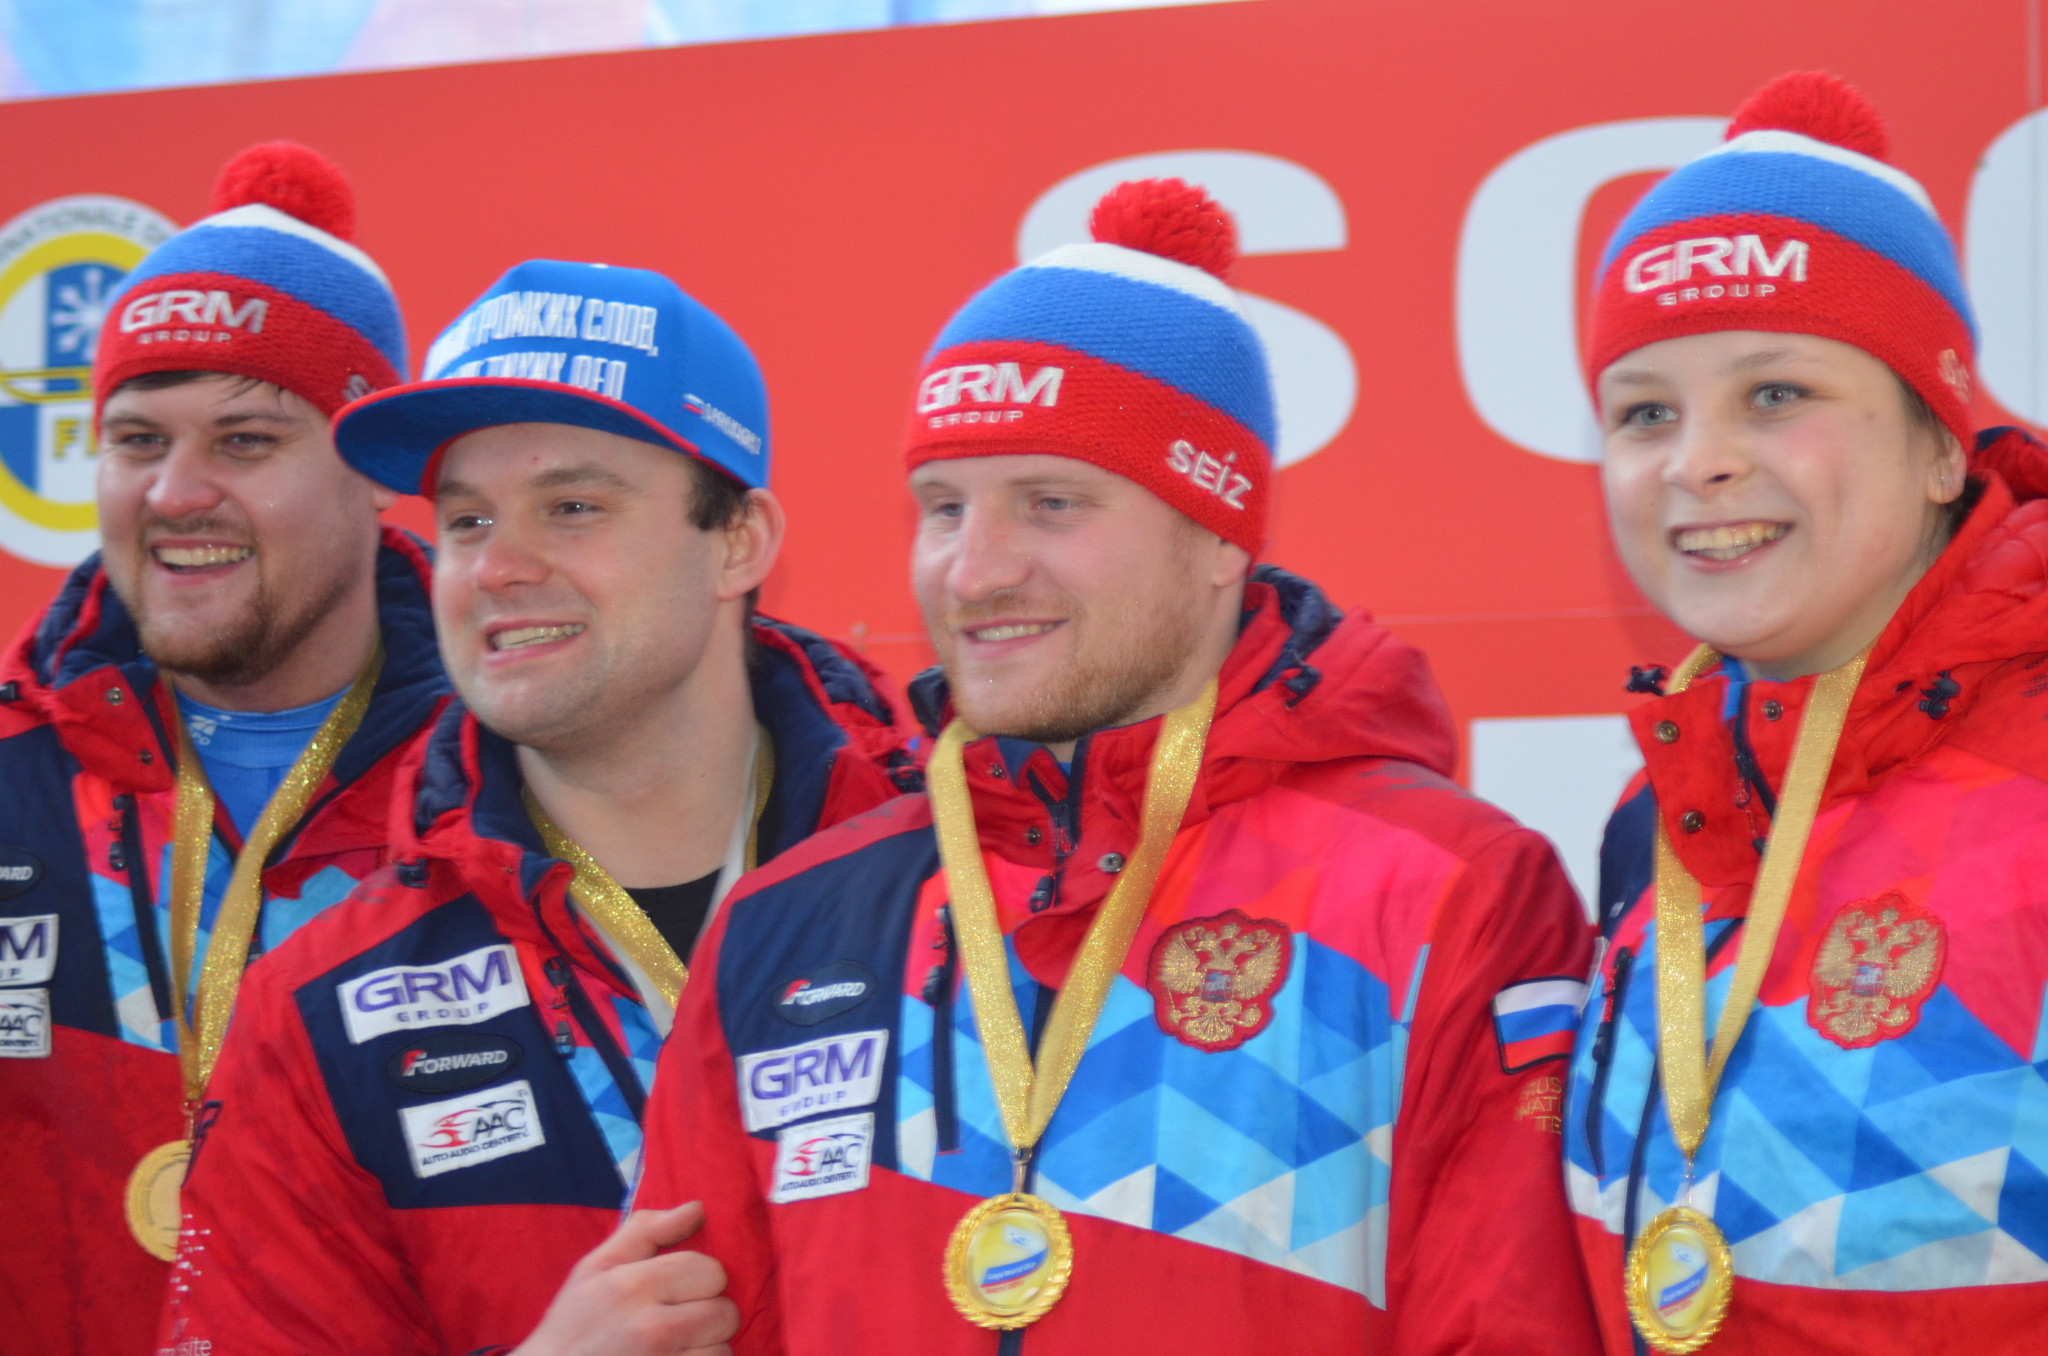 The Russian relay team won in Sochi, finishing second in the overall World Cup standings ©FIL